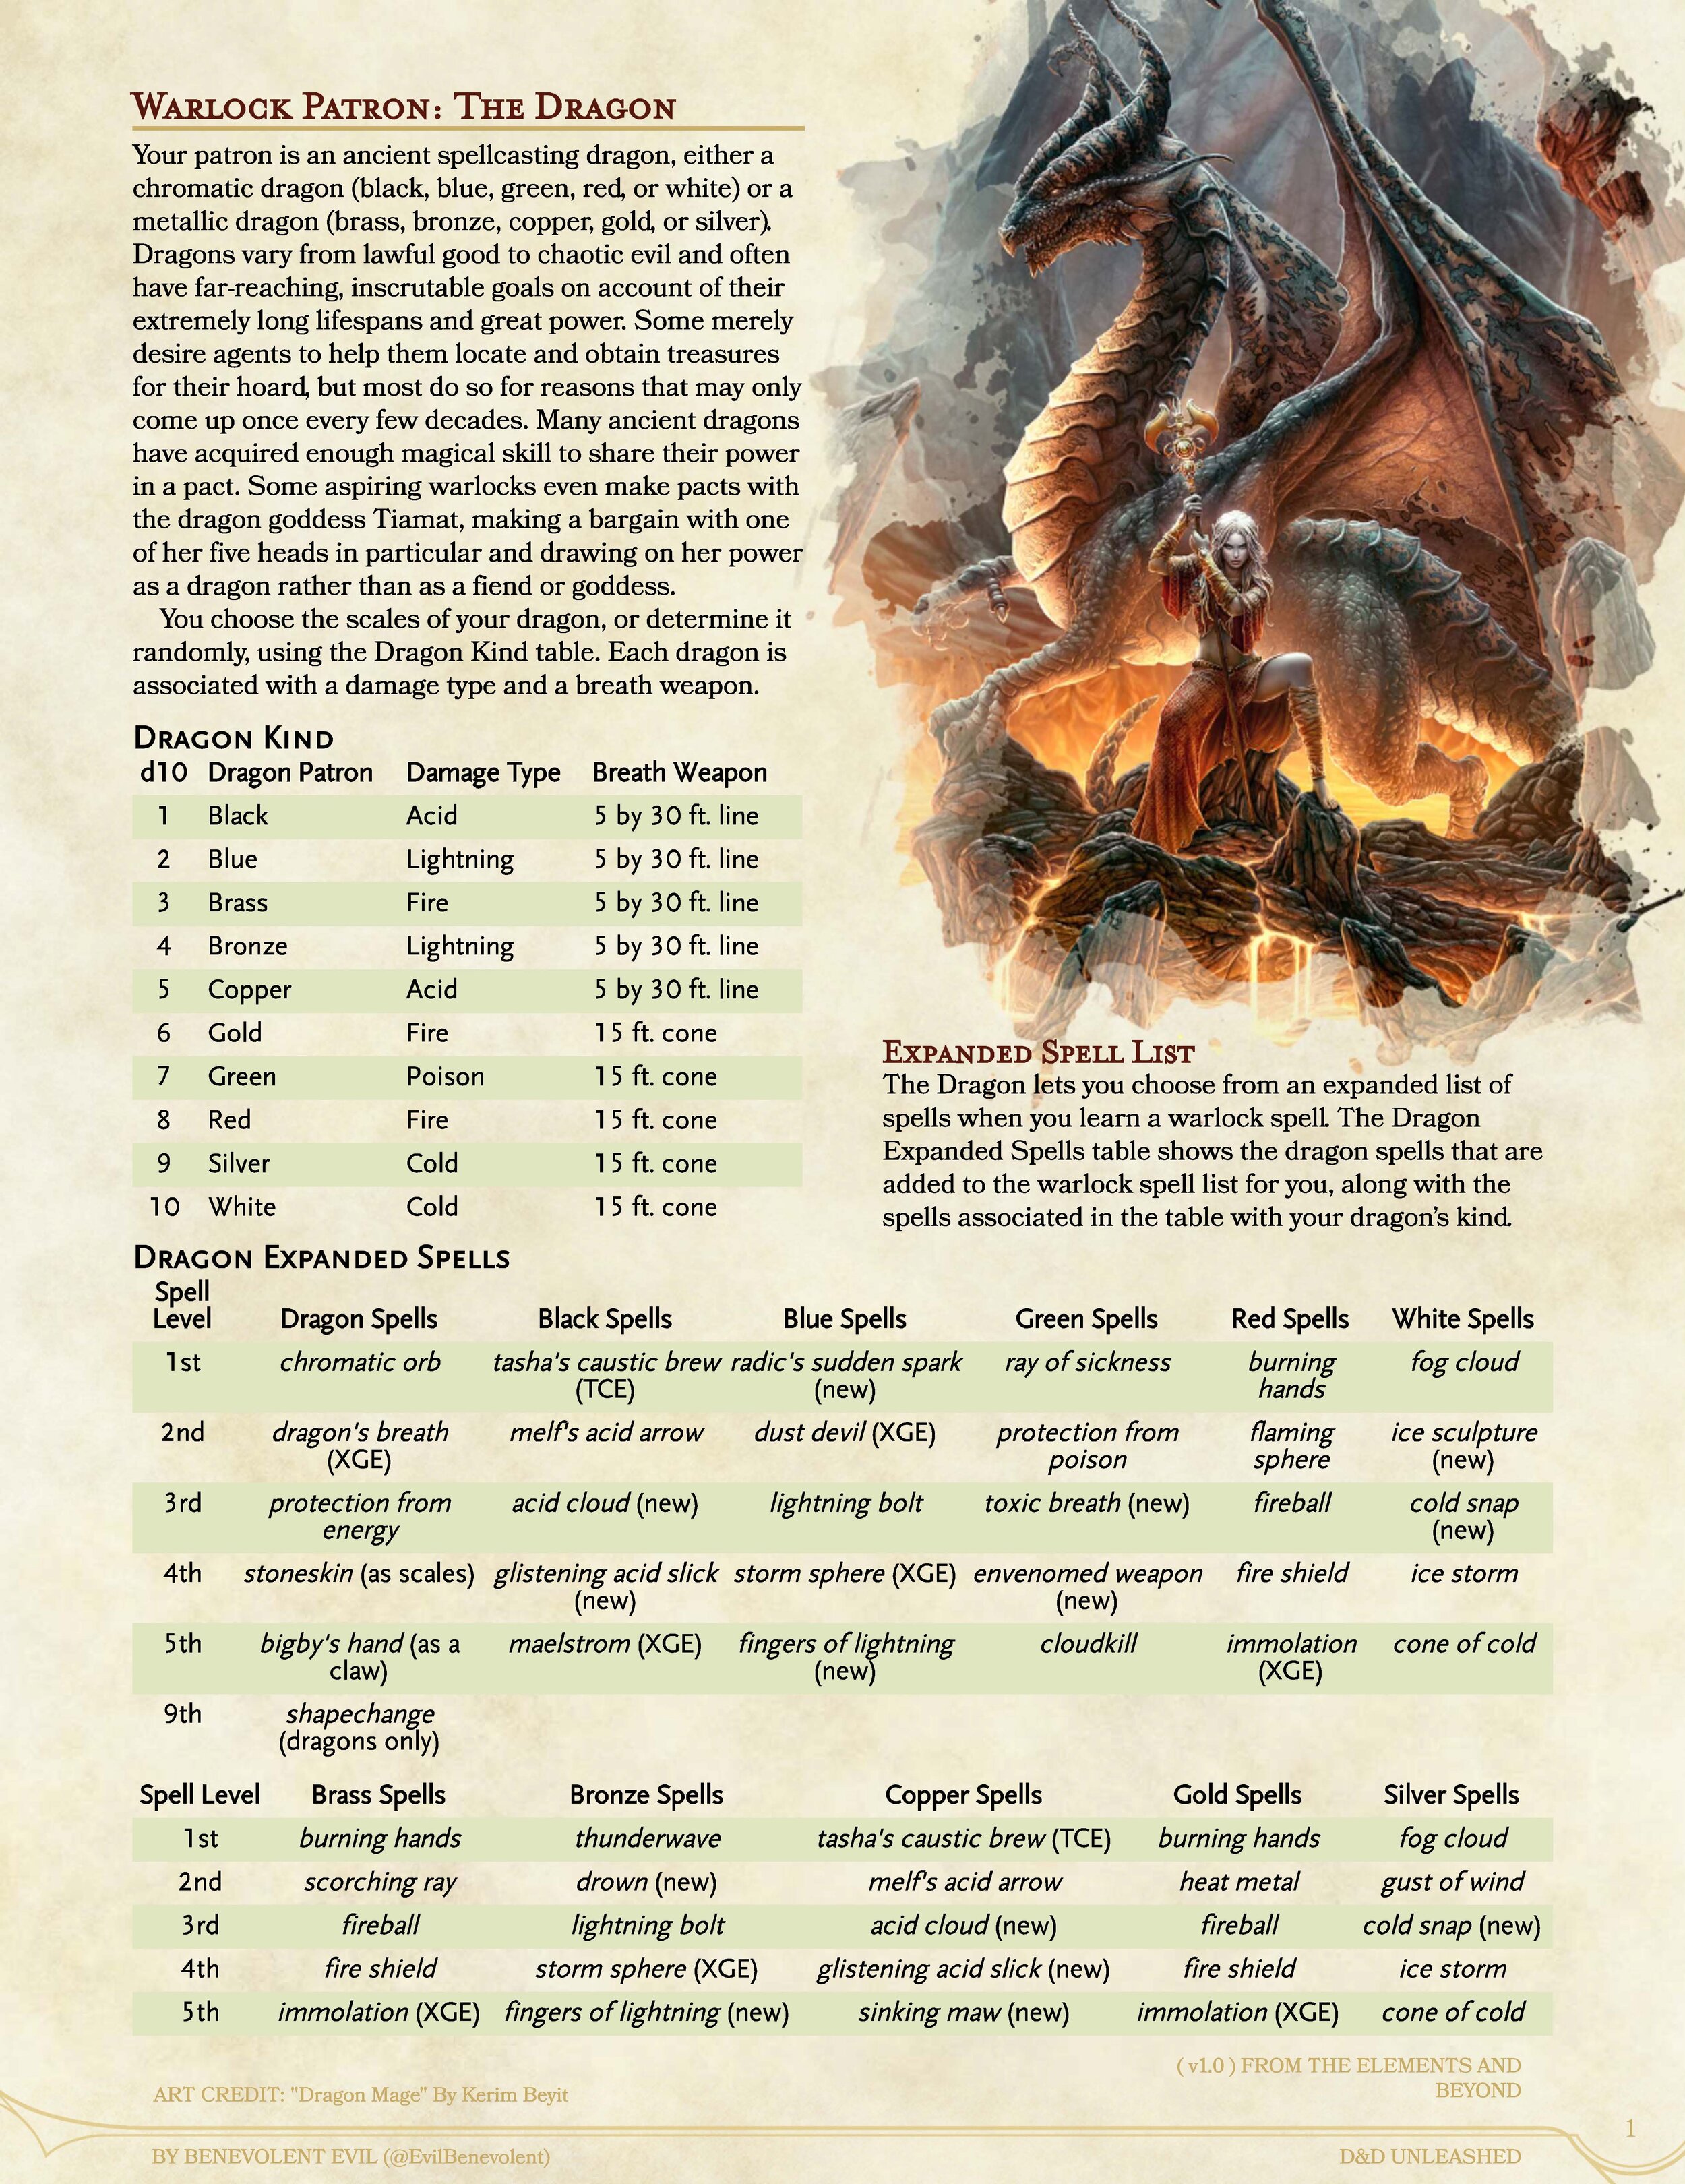 D&D Unleashed - The Dragon Patron Warlock (1p0)_Page_1.jpg